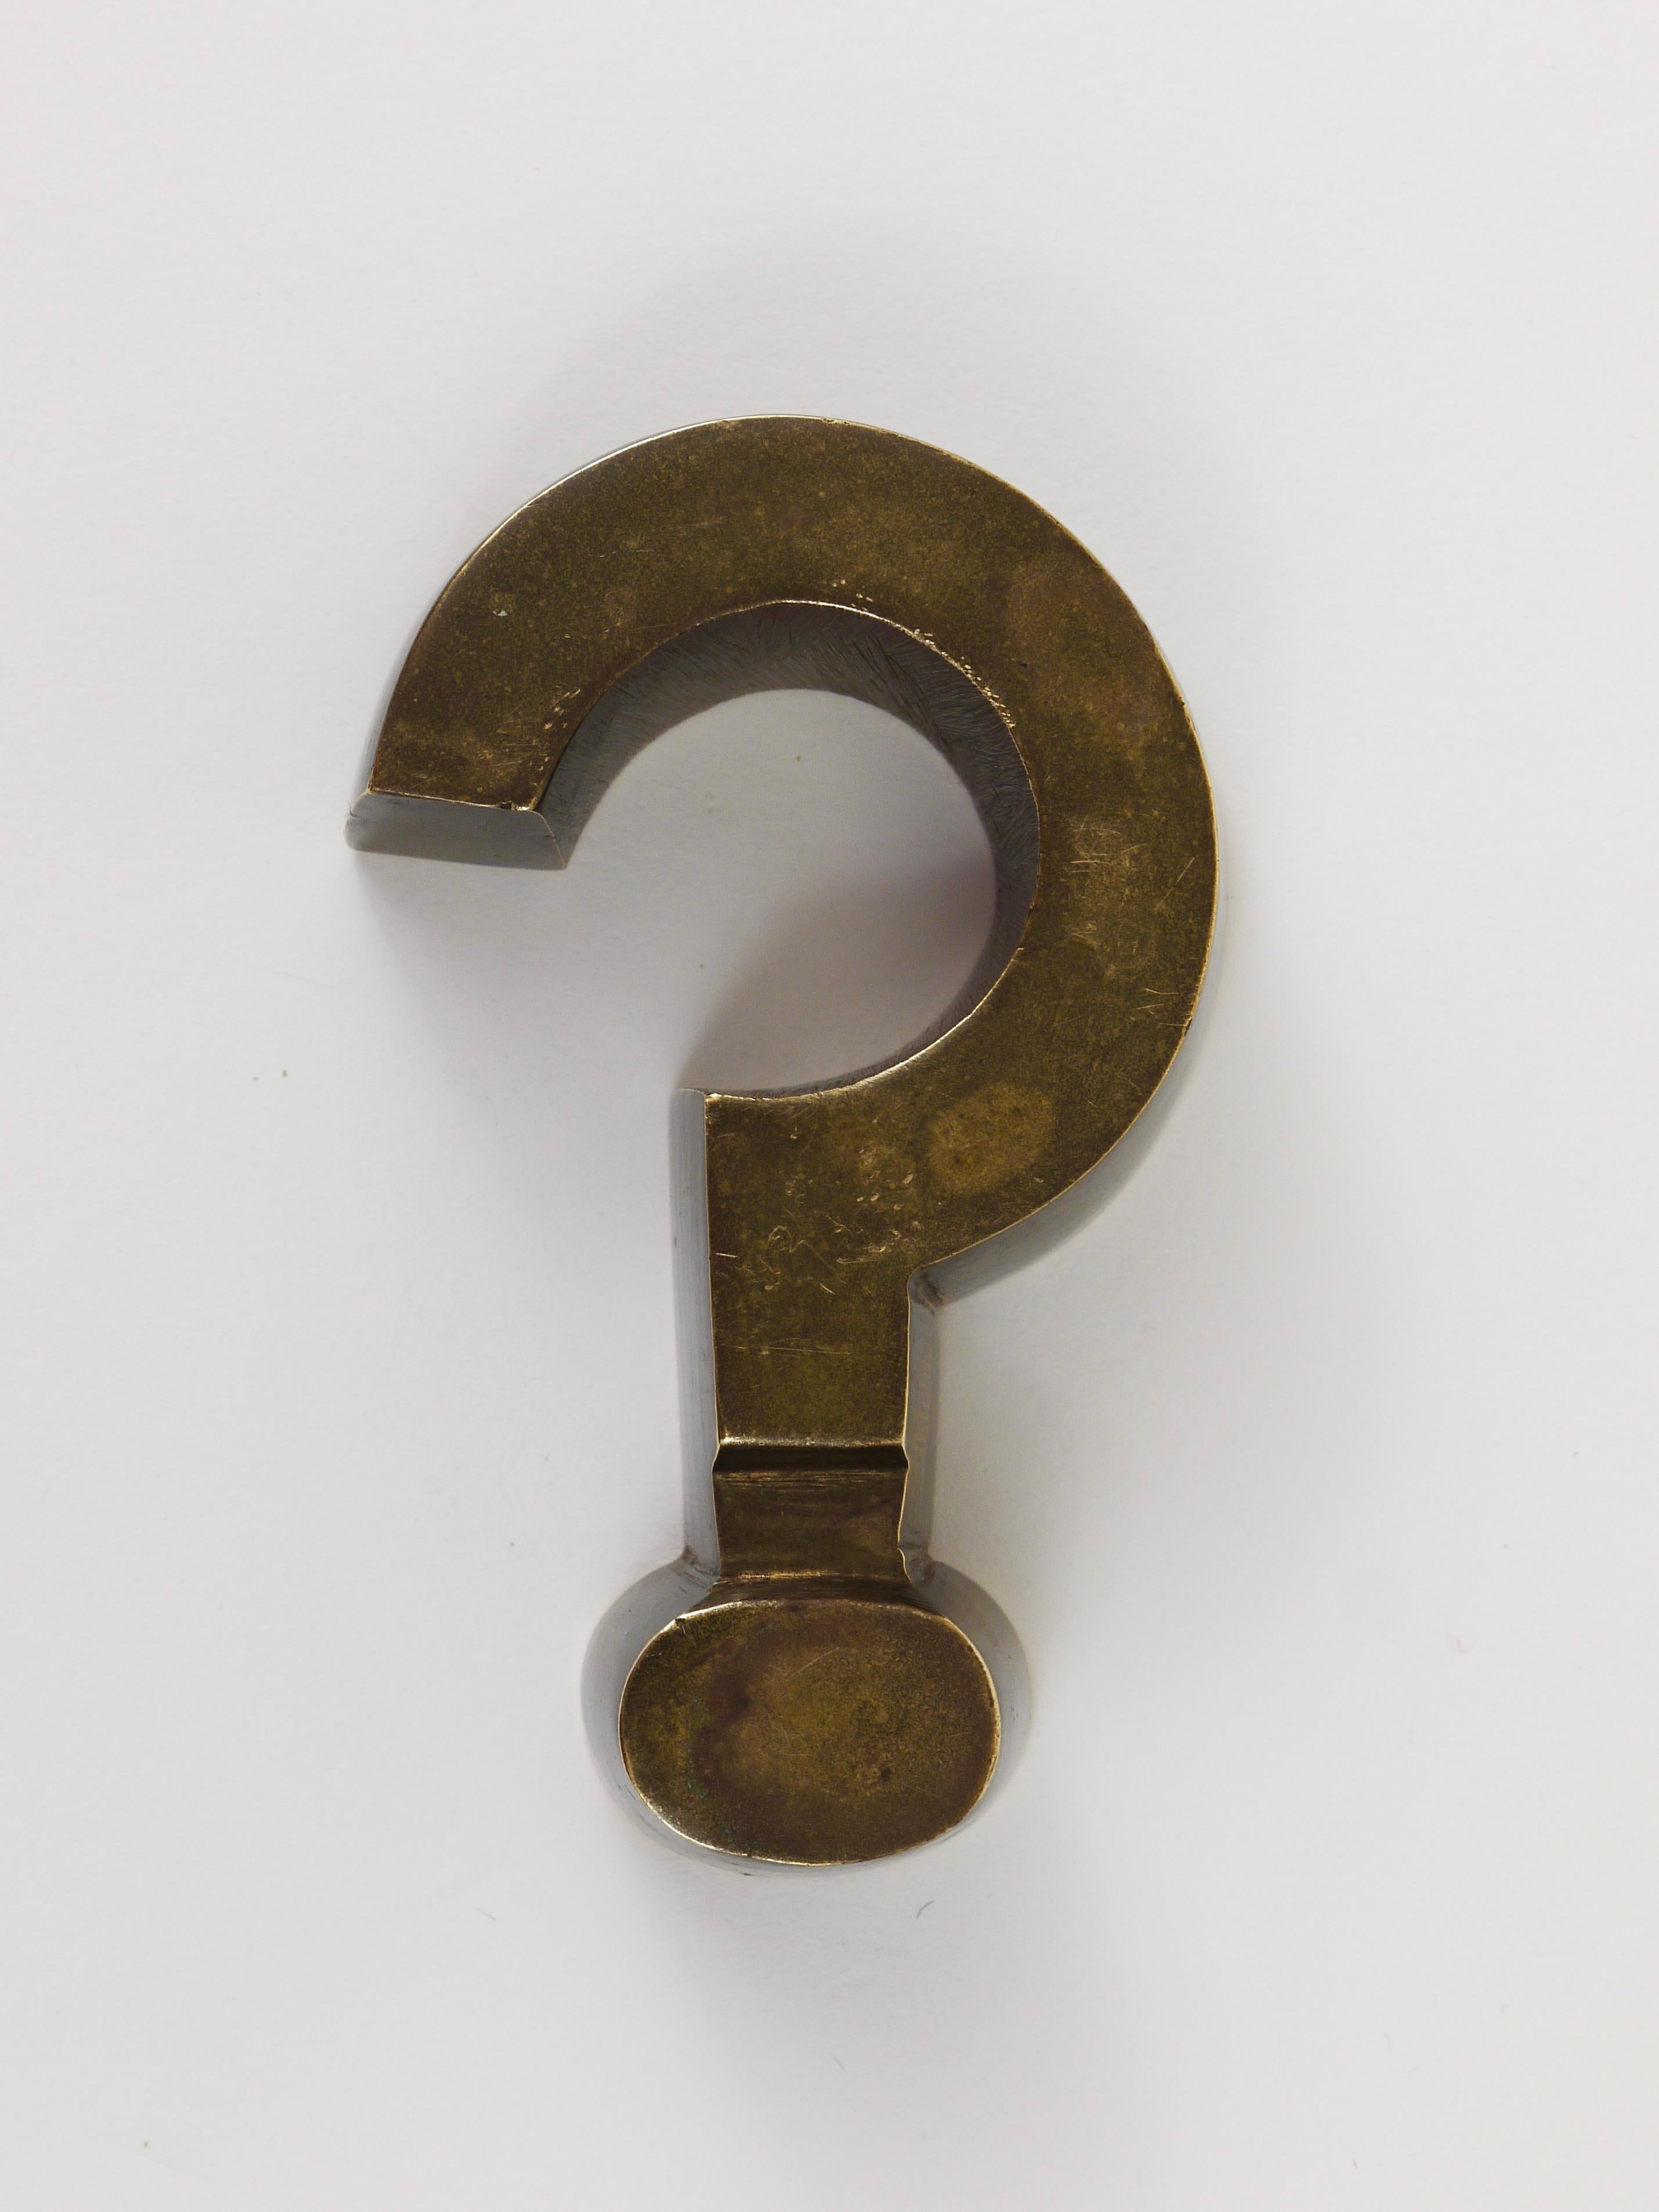 A charming and decorative paperweight in the shape of a question mark from the 1970s. Made of solid brass, in good condition with nice patina.